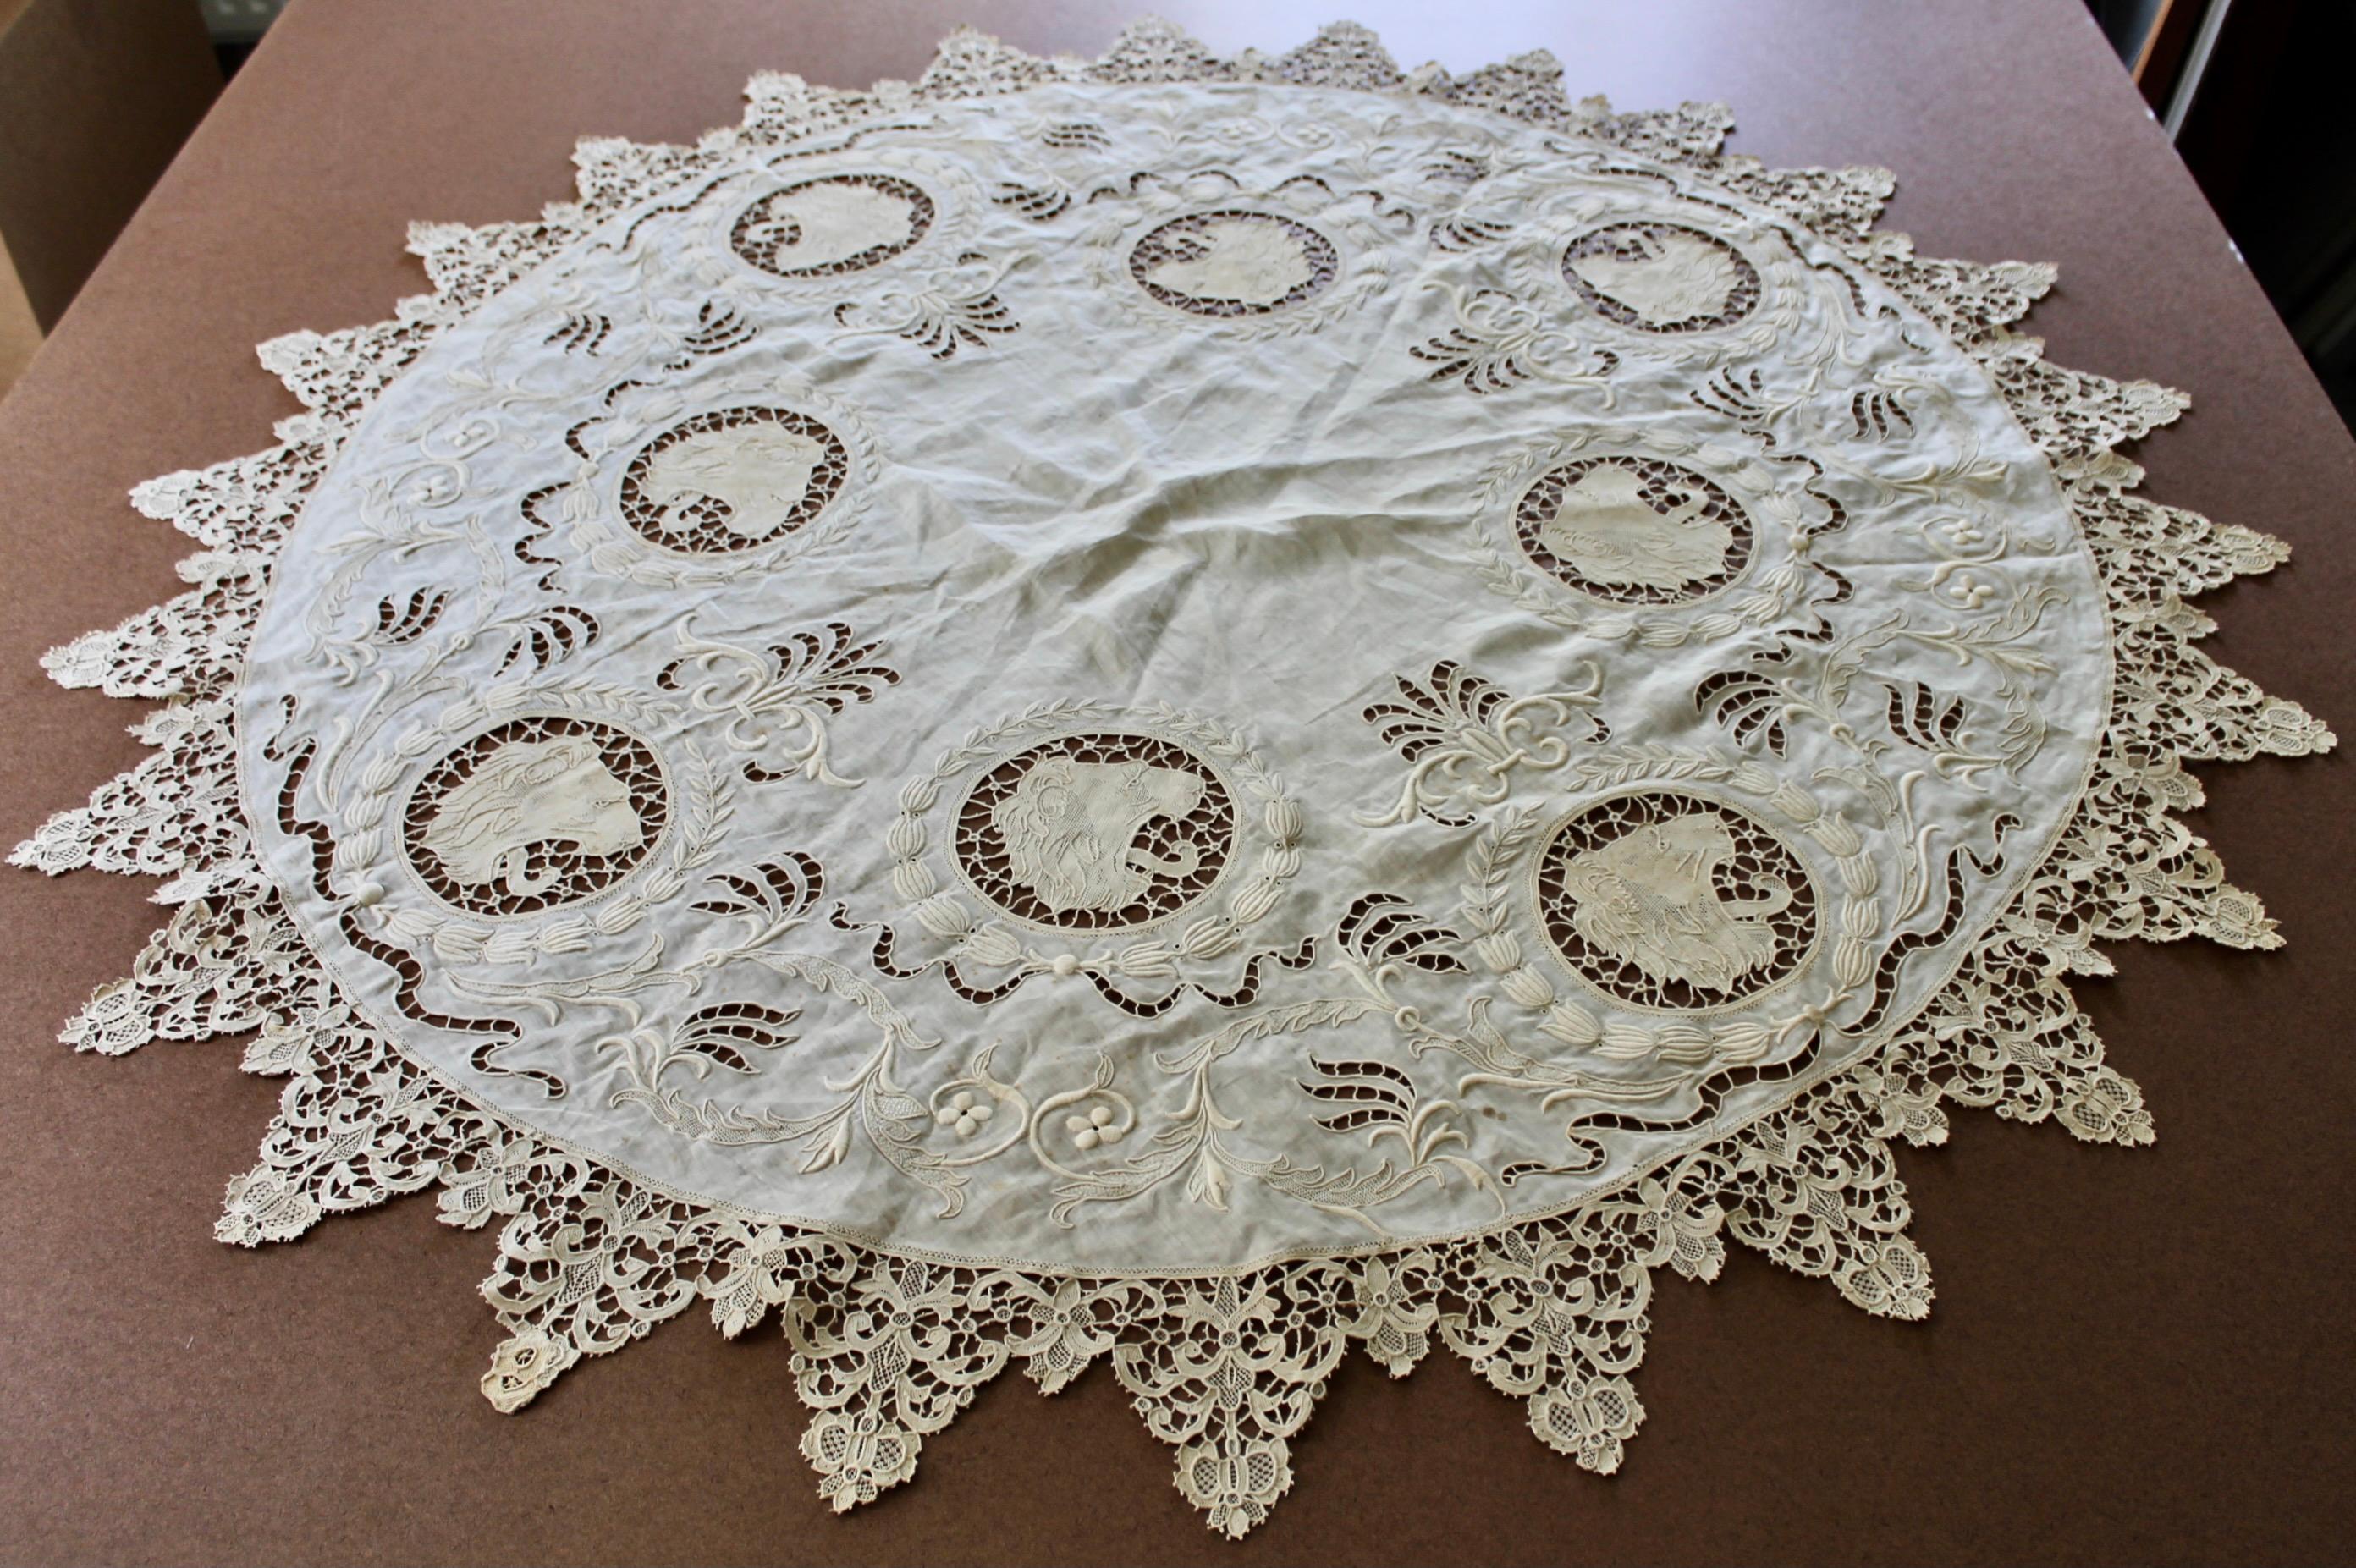 Antique Italian Lace Tablecloth, late 19th c. For Sale 3